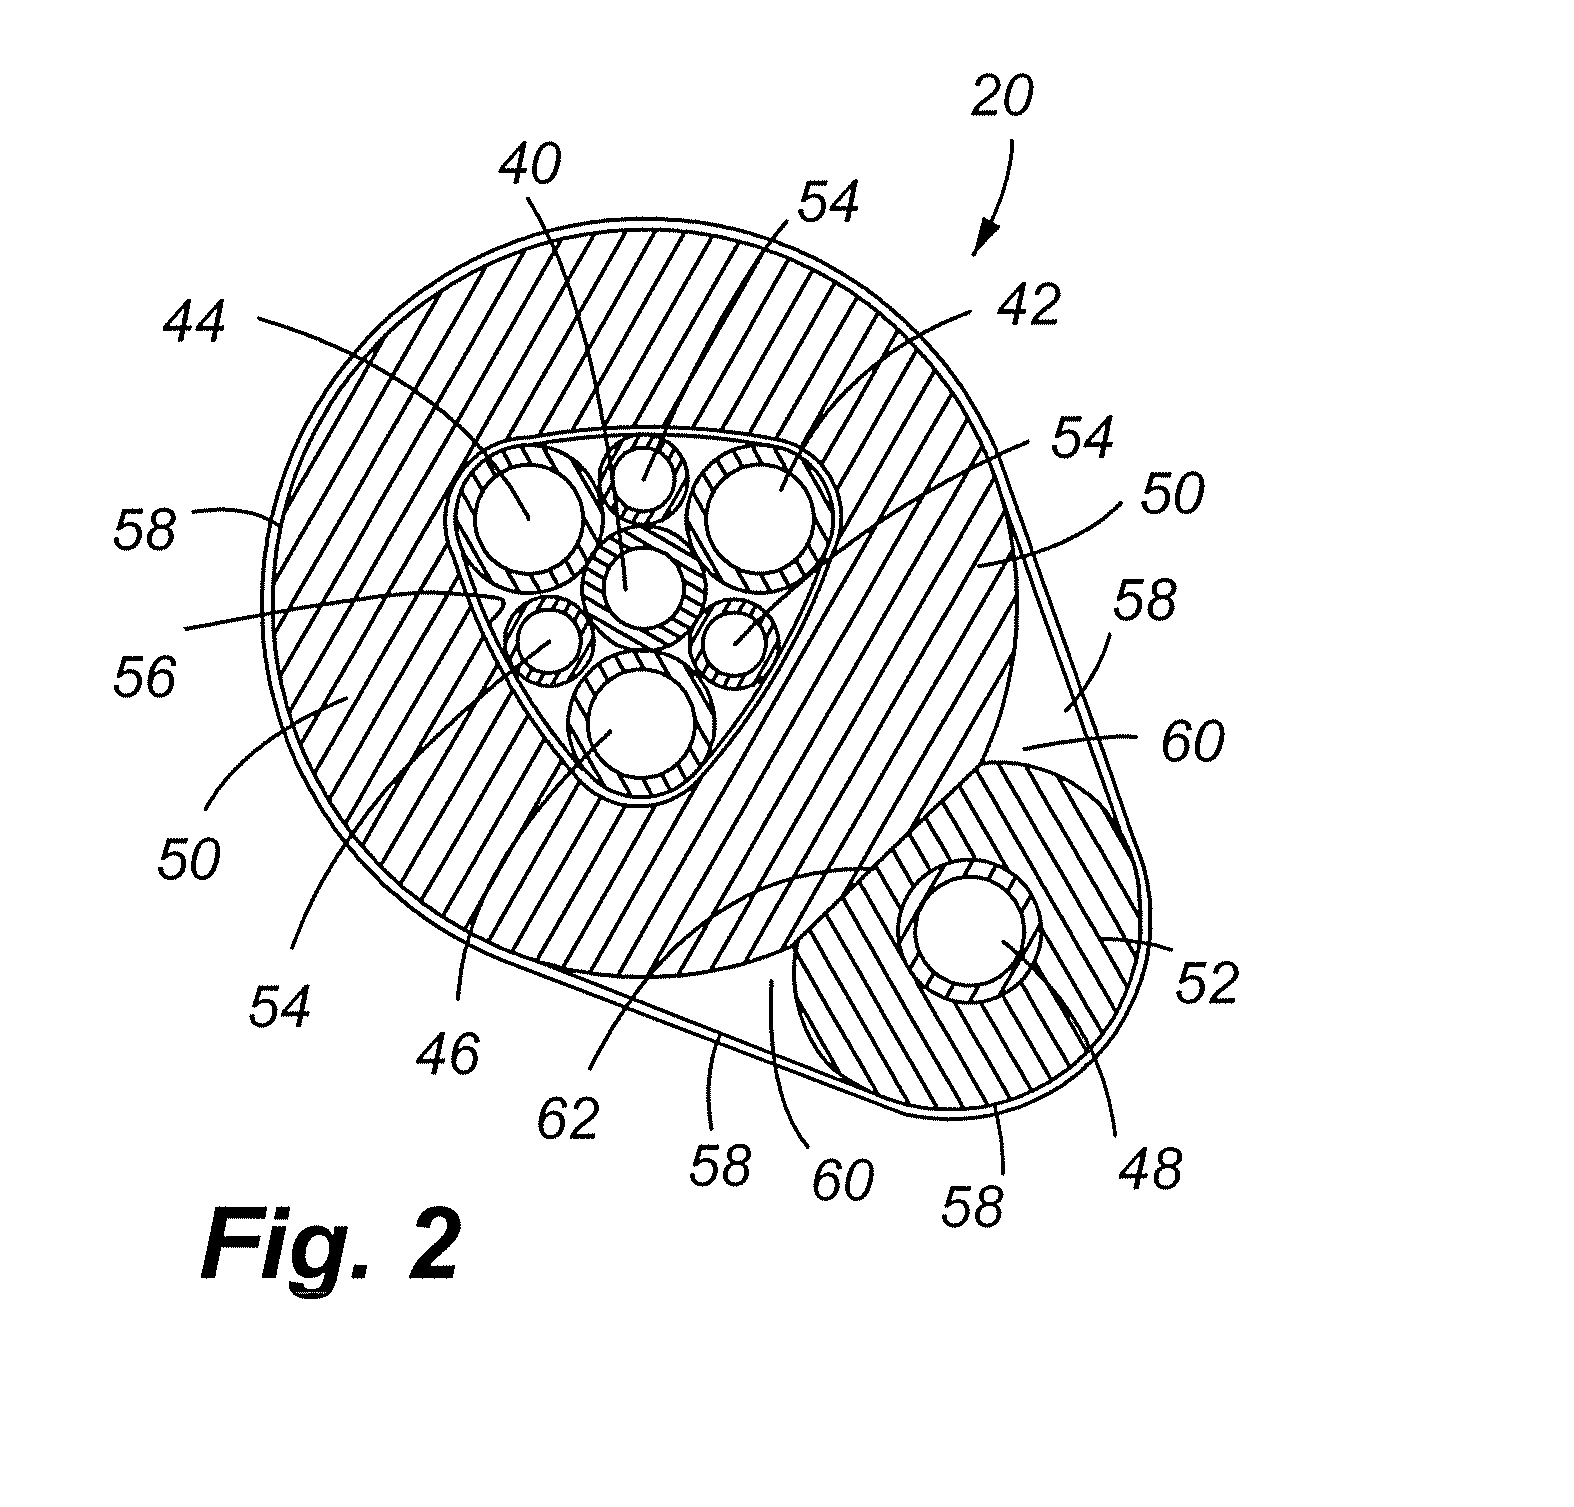 Insulated and refrigerated beverage transport line